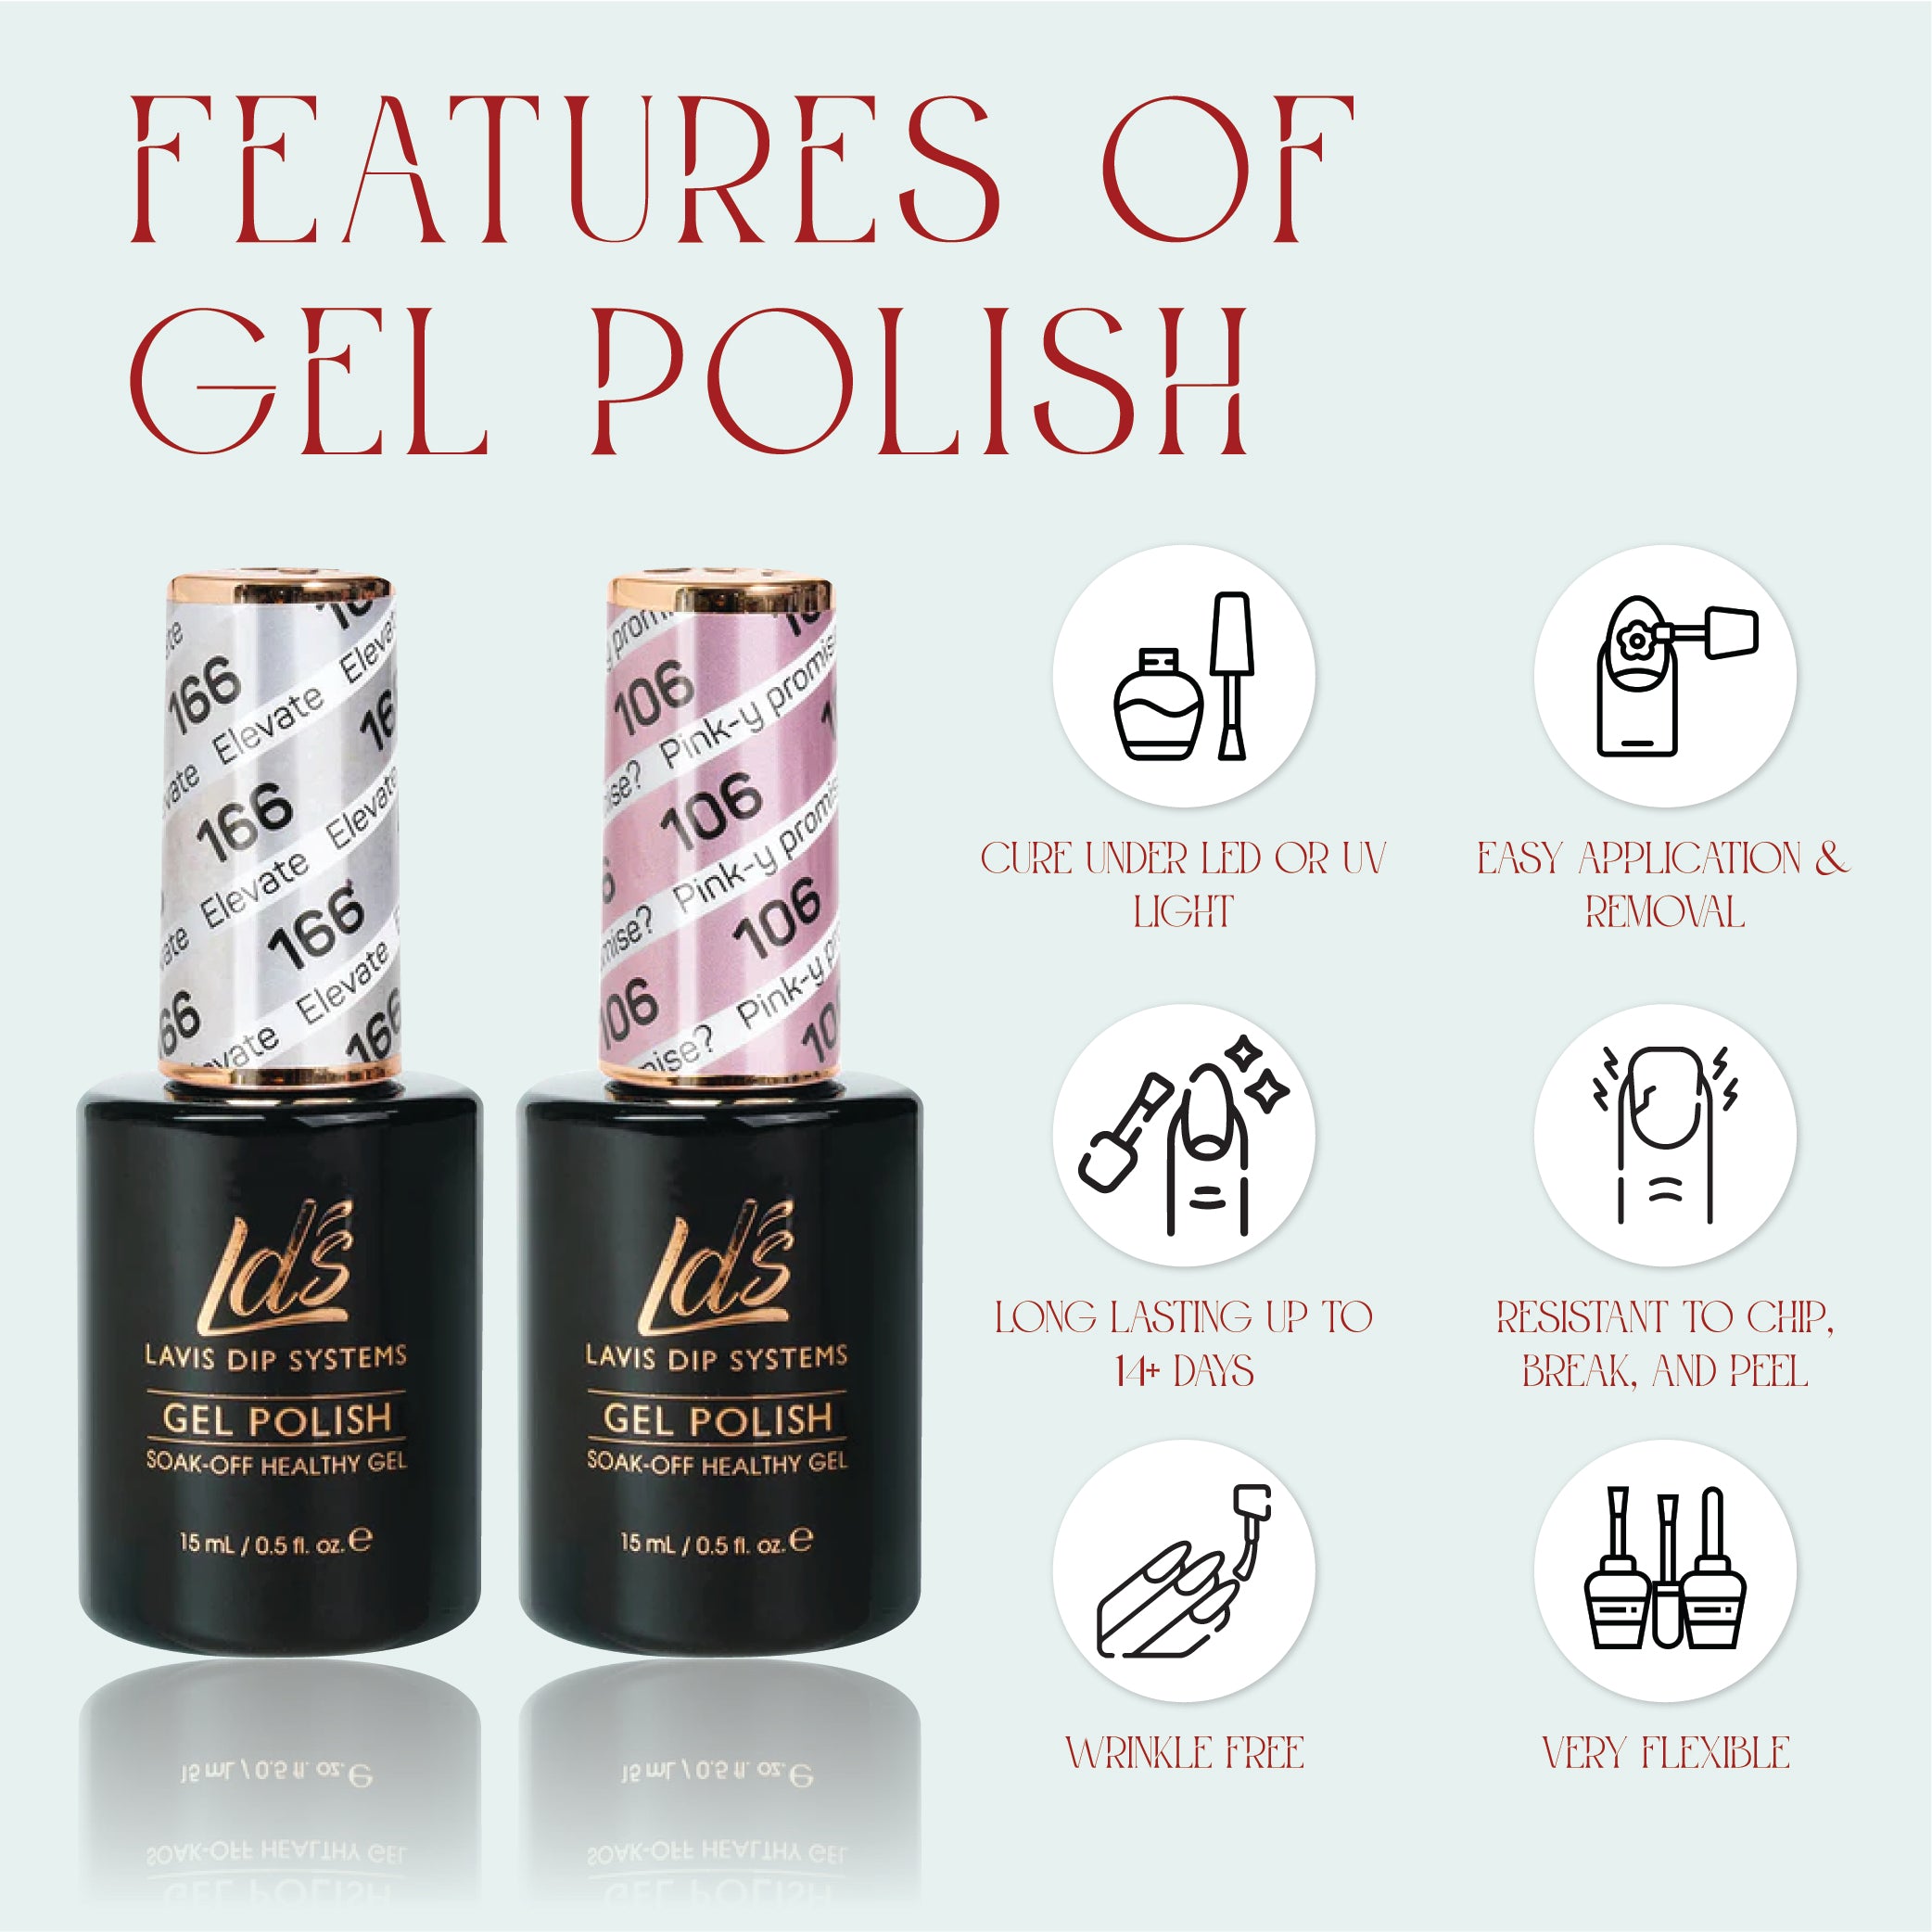 LDS 182 Dreamy Cloud - LDS Gel Polish 0.5oz - Cover Nude Collection